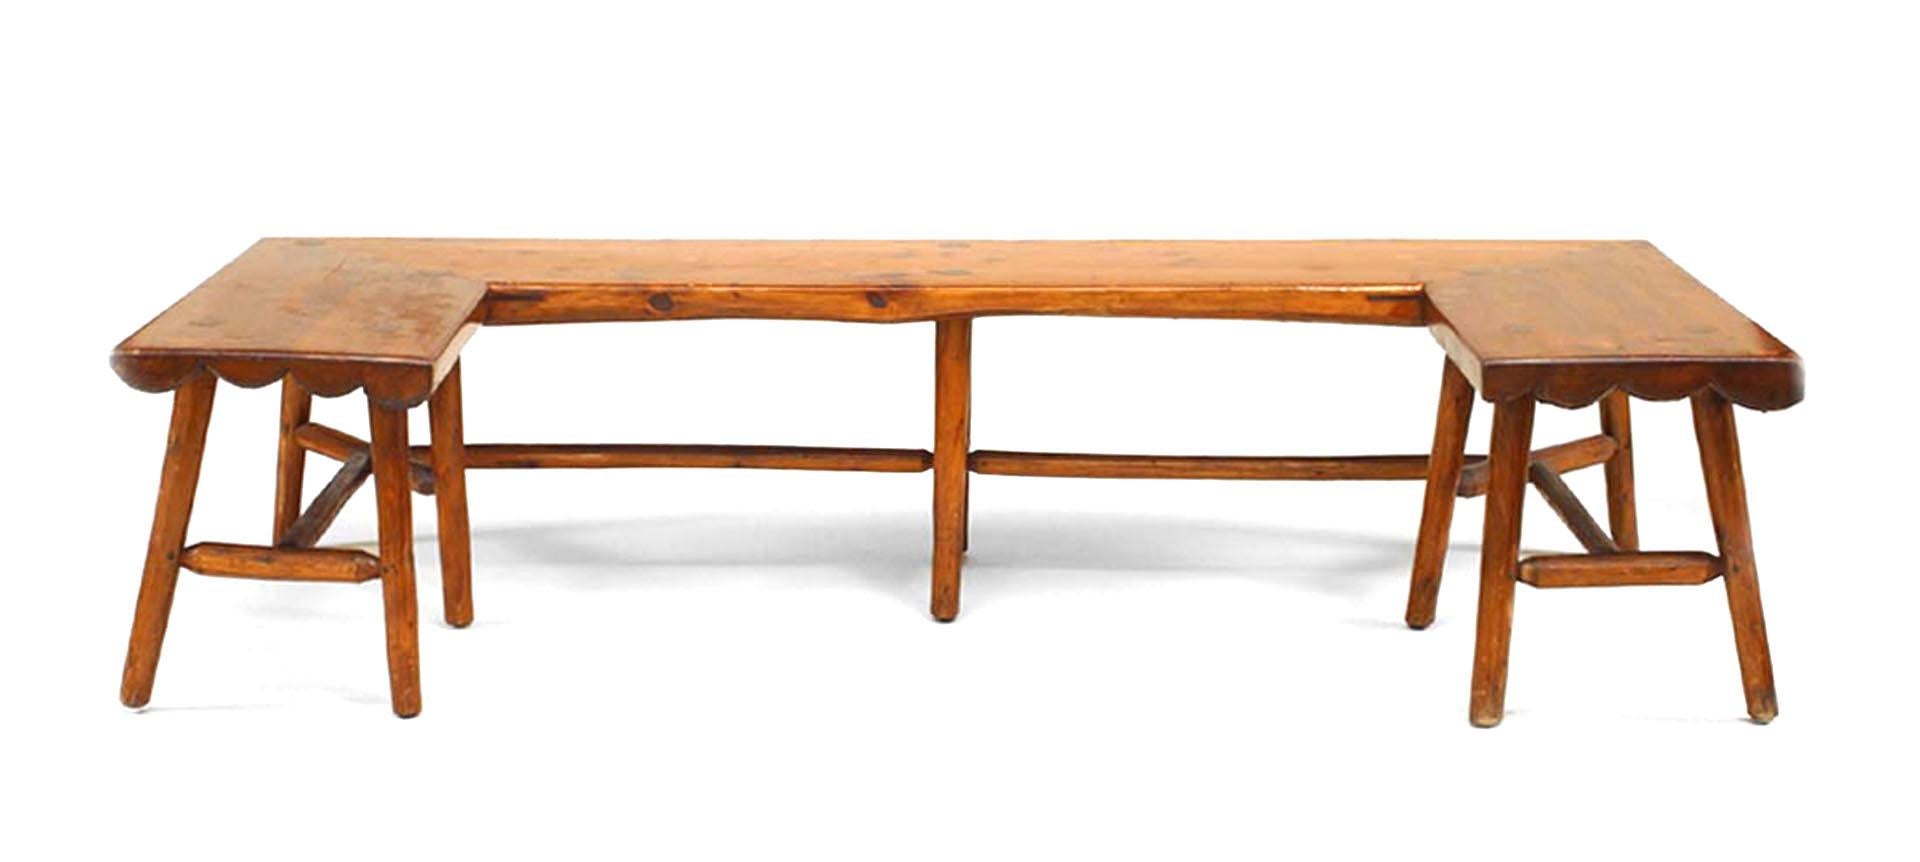 Bearing the brand of the Habitant Furniture Company of Michigan, this three-sided Old Hickory style hickory bench features a half timbered seat, stretcher, and scalloped edge front.